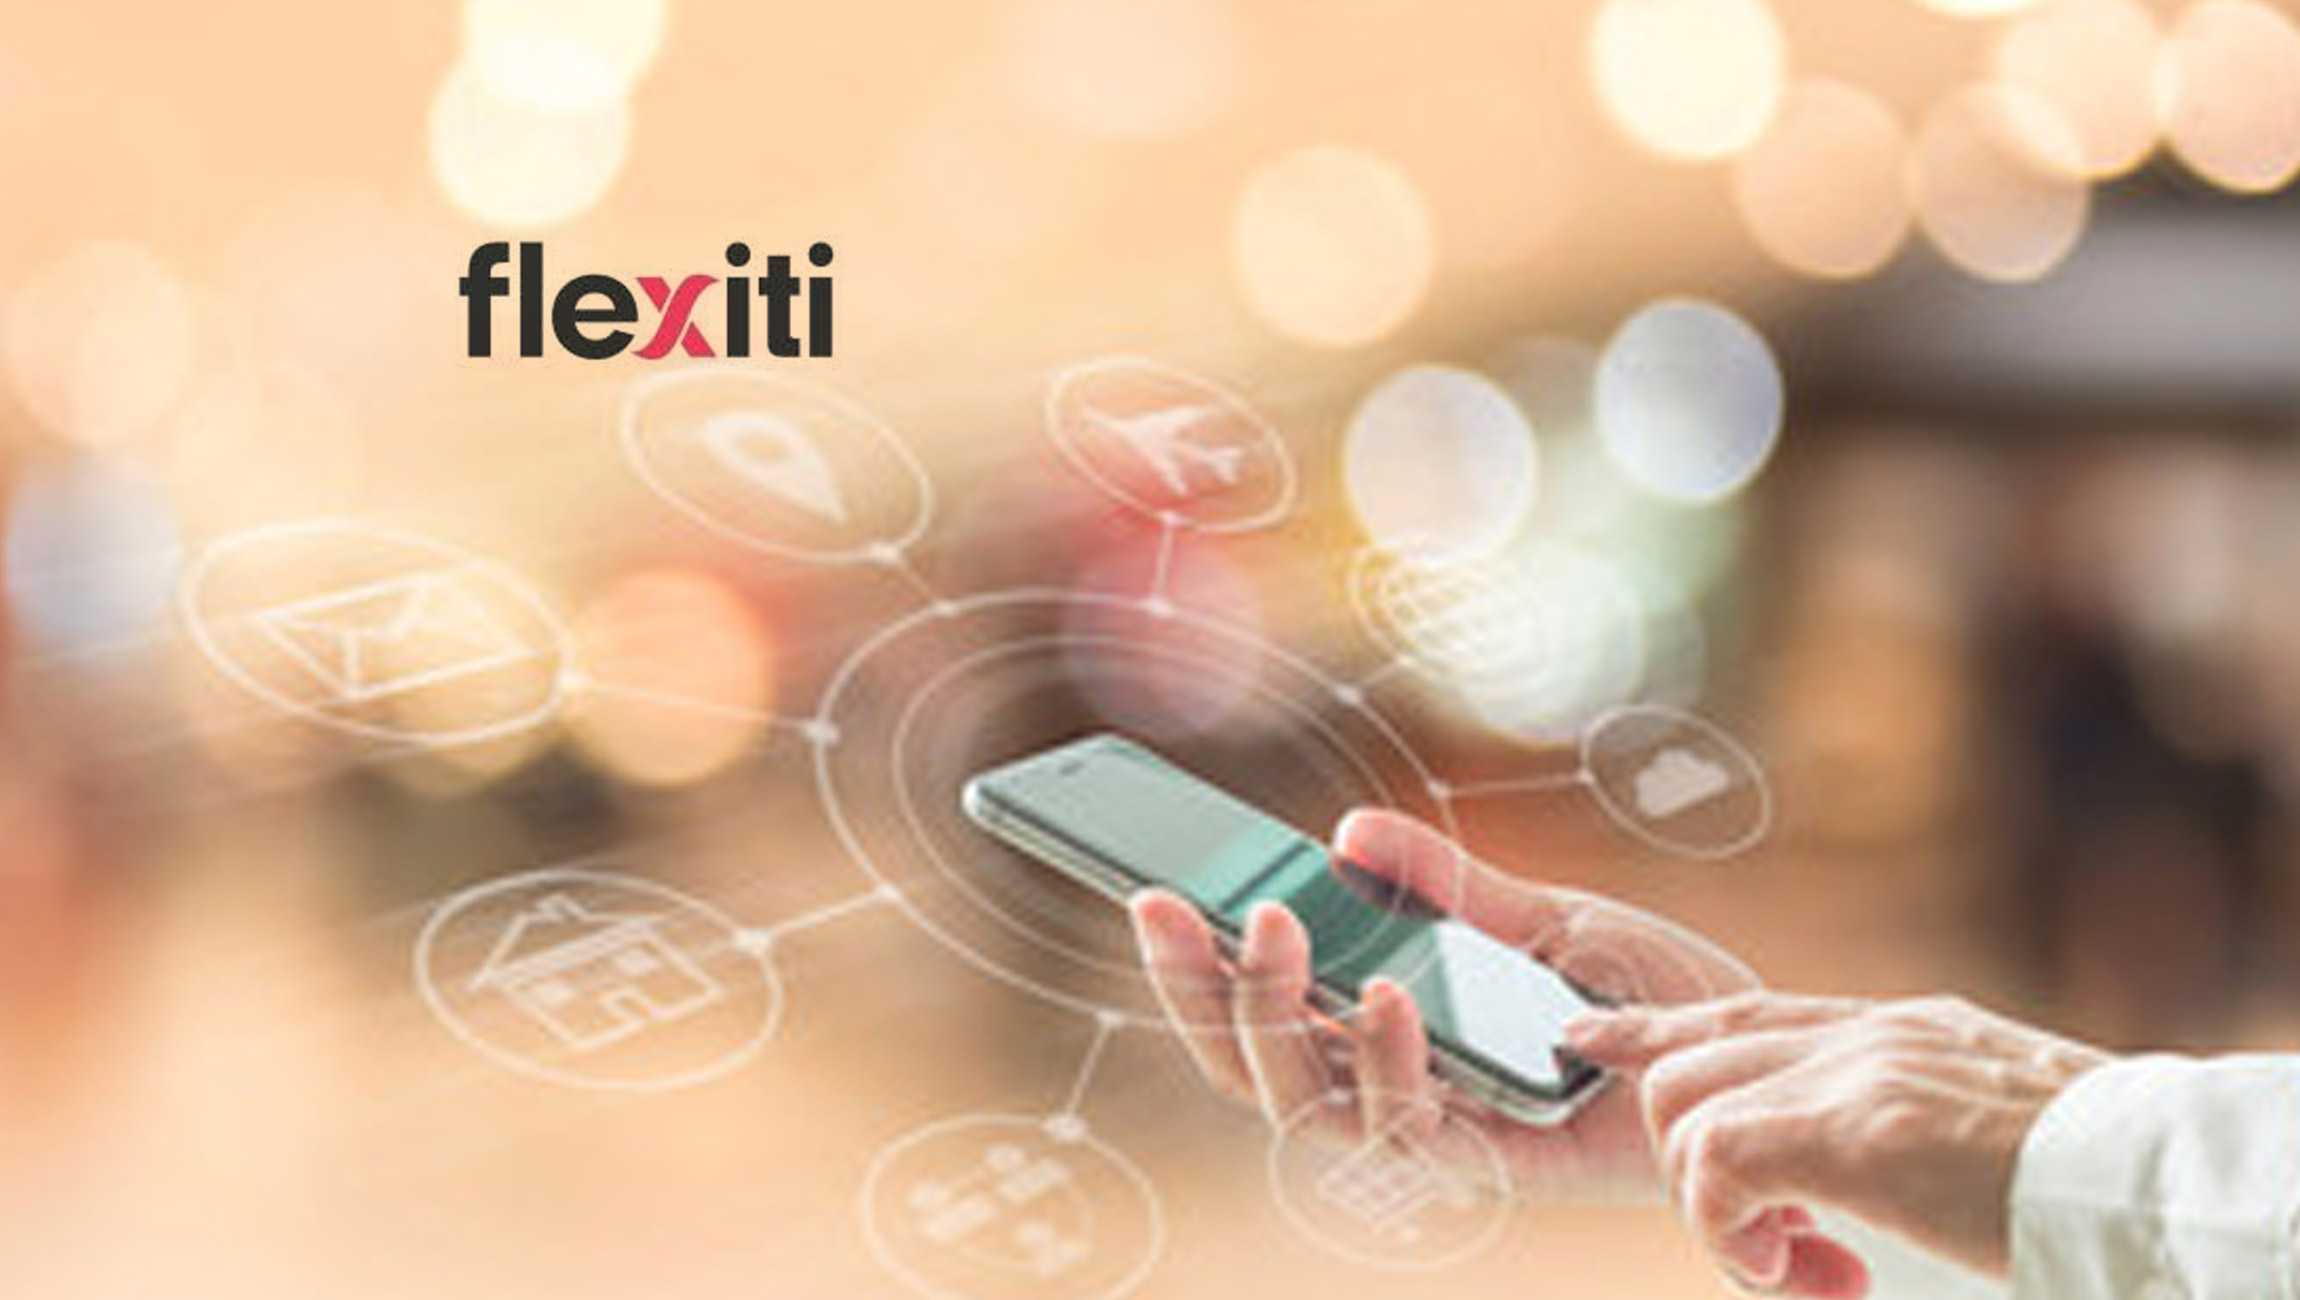 Flexiti-Launches-its-Omni-Channel-point-of-sale-Financing-solution-at-Michael-Hill’s-85-Canadian-Stores-and-at-michaellhill.ca_-and-agrees-to-acquire-existing-Michael-Hill-Card-Portfolio